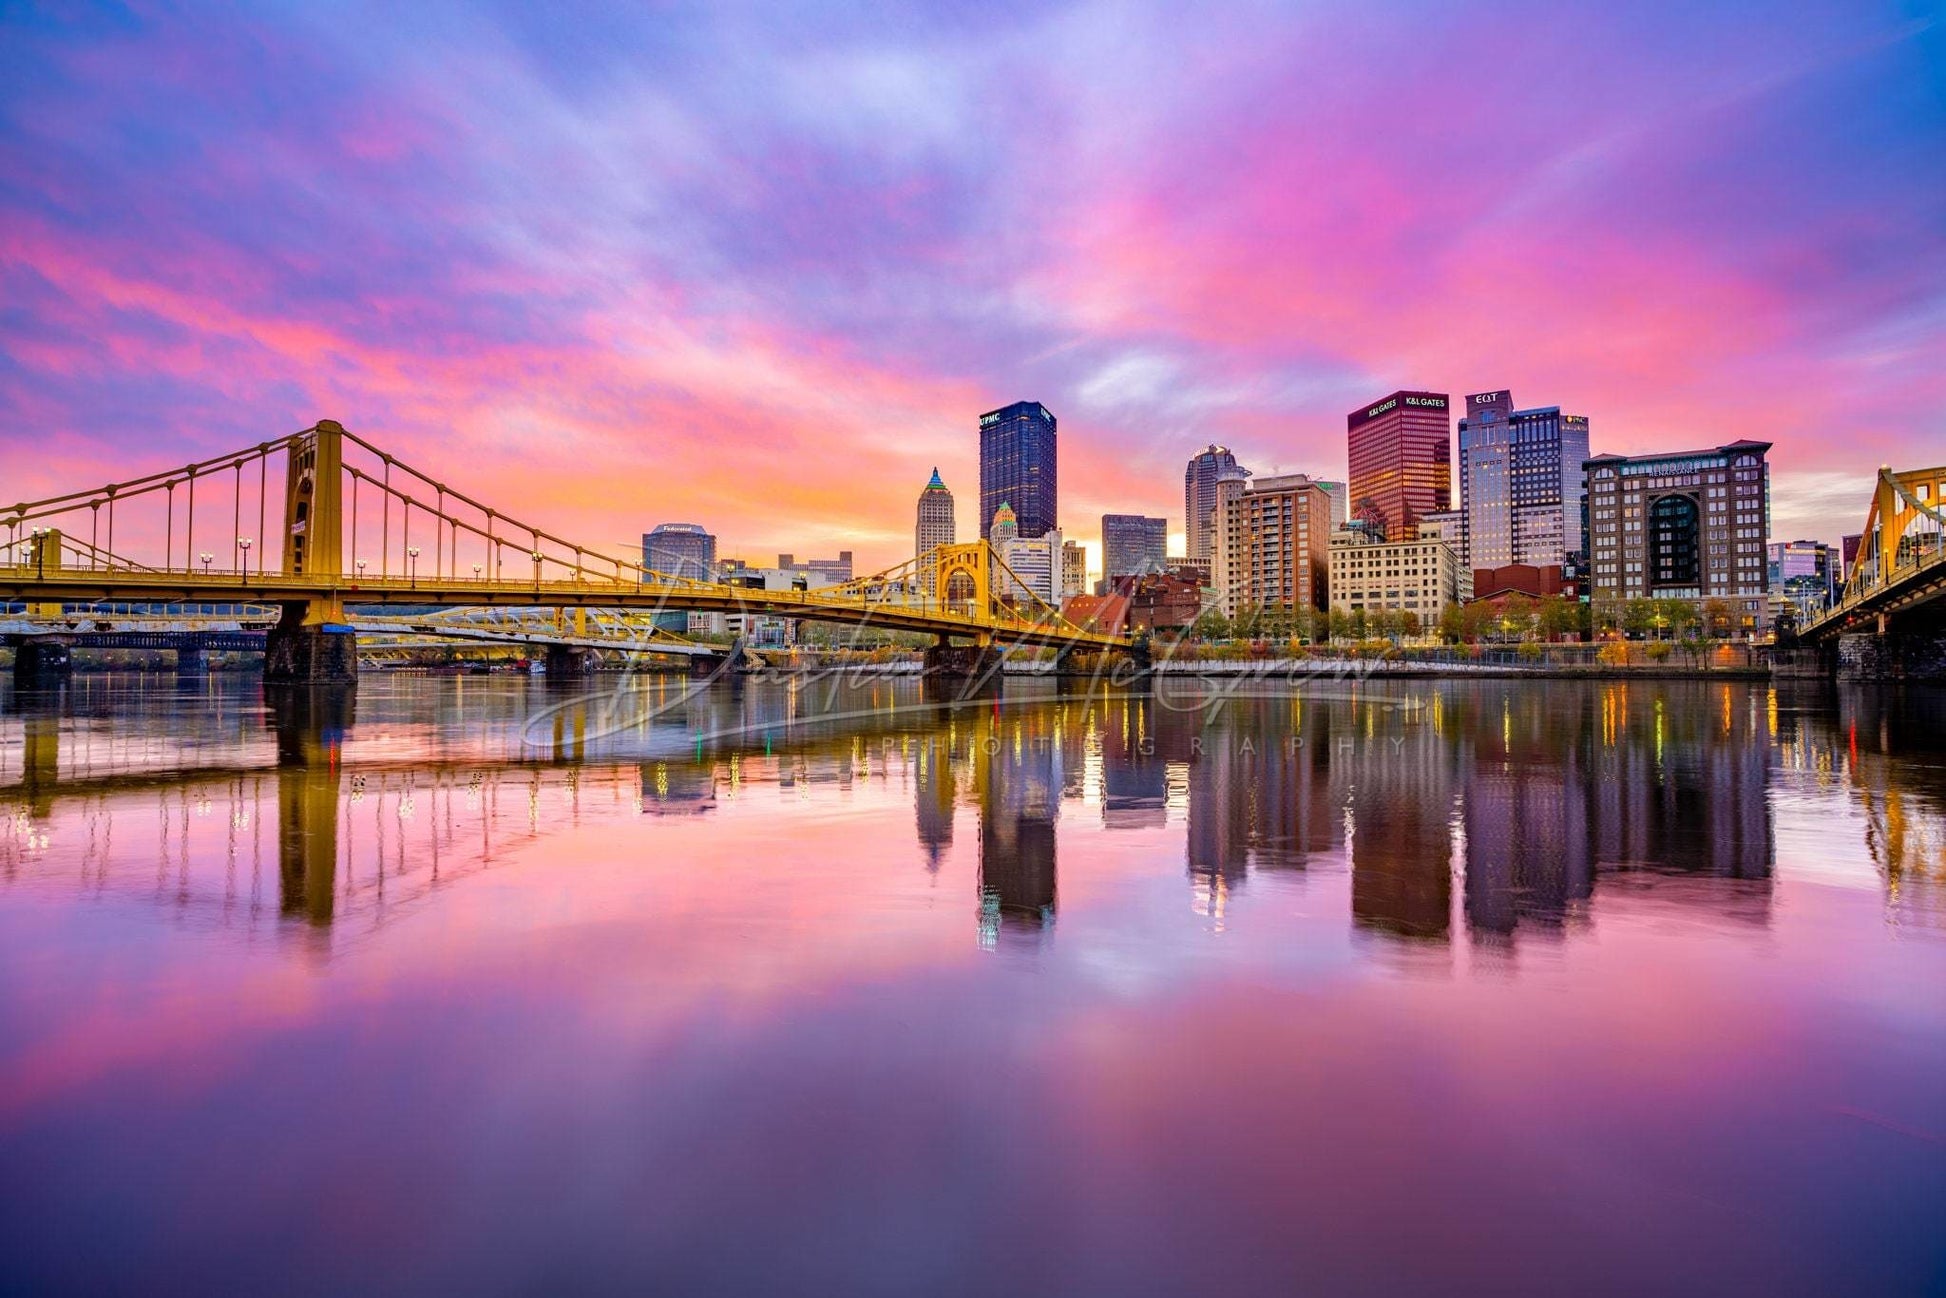 Photo Of The Pittsburgh Skyline With An Amazing Sunrise